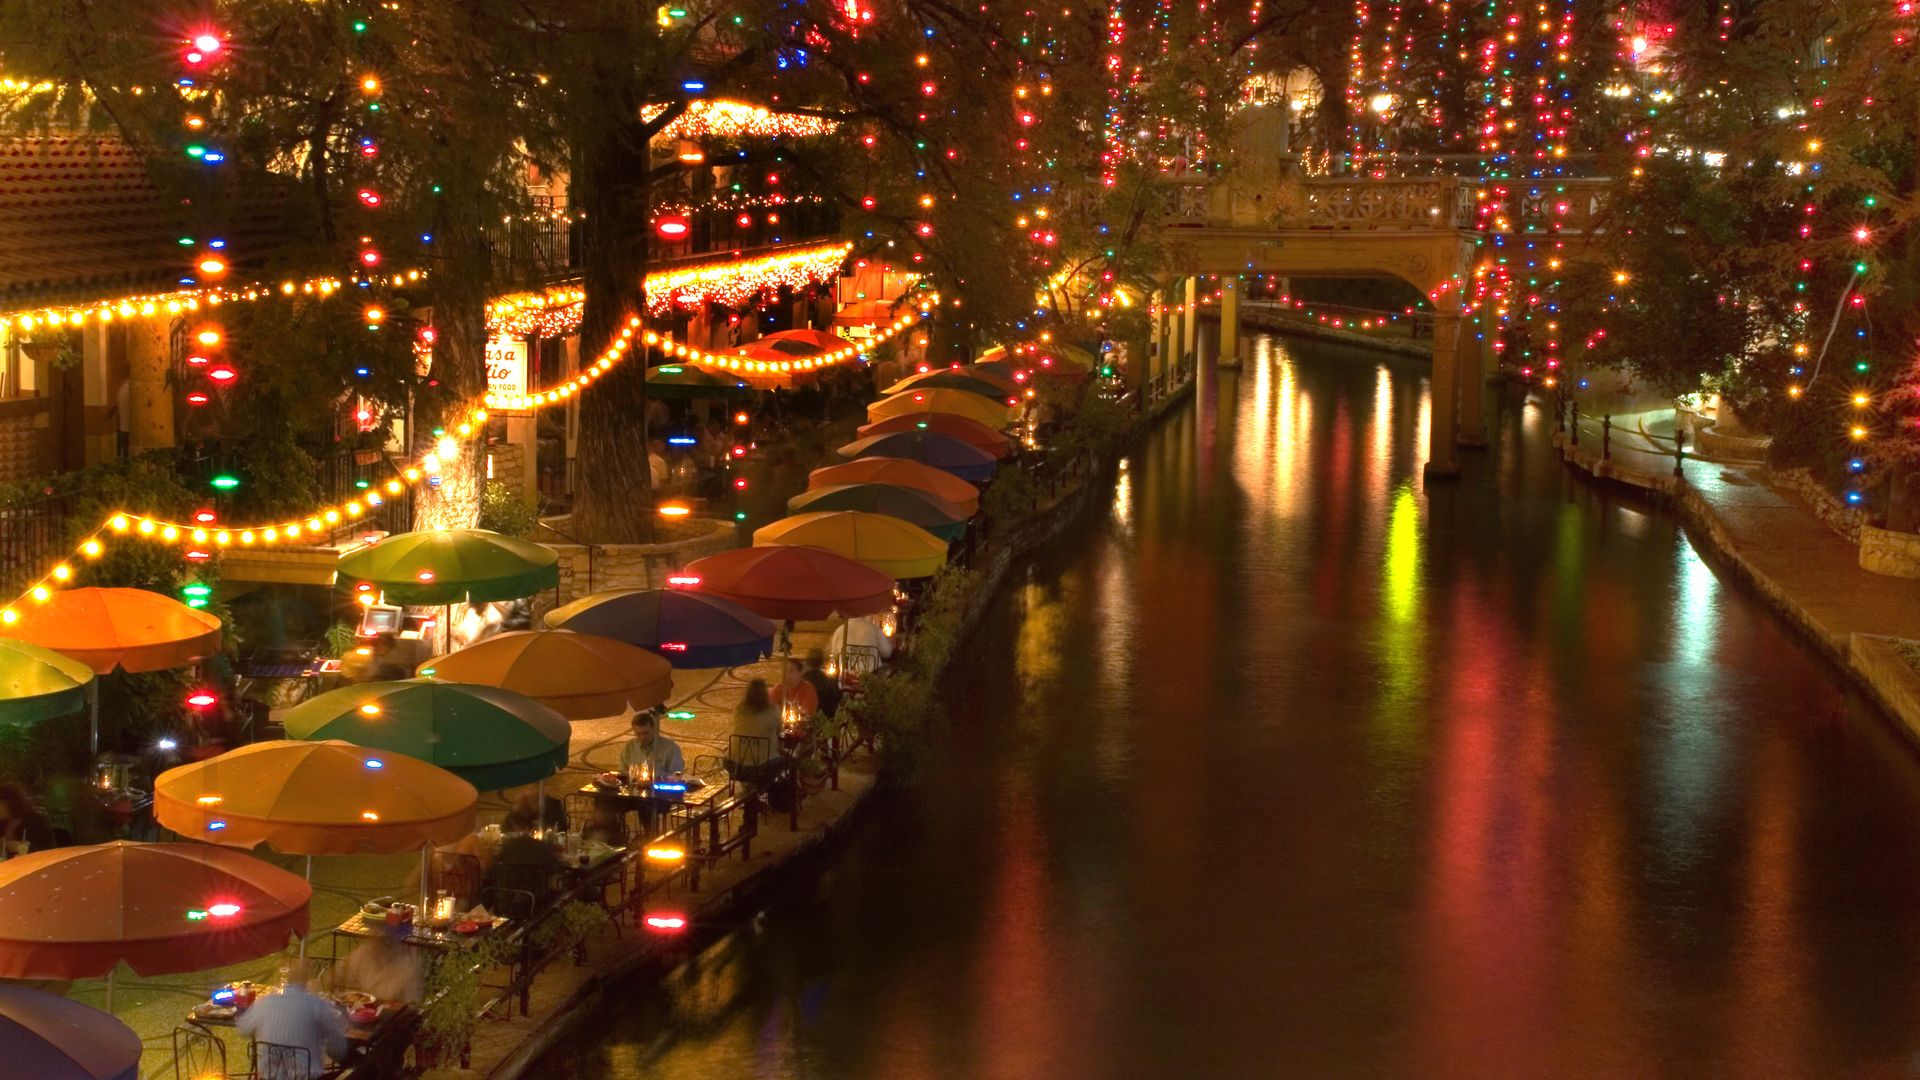 San Antonio's River Walk at night, decorated for the holidays with lights draped over trees lining the water.